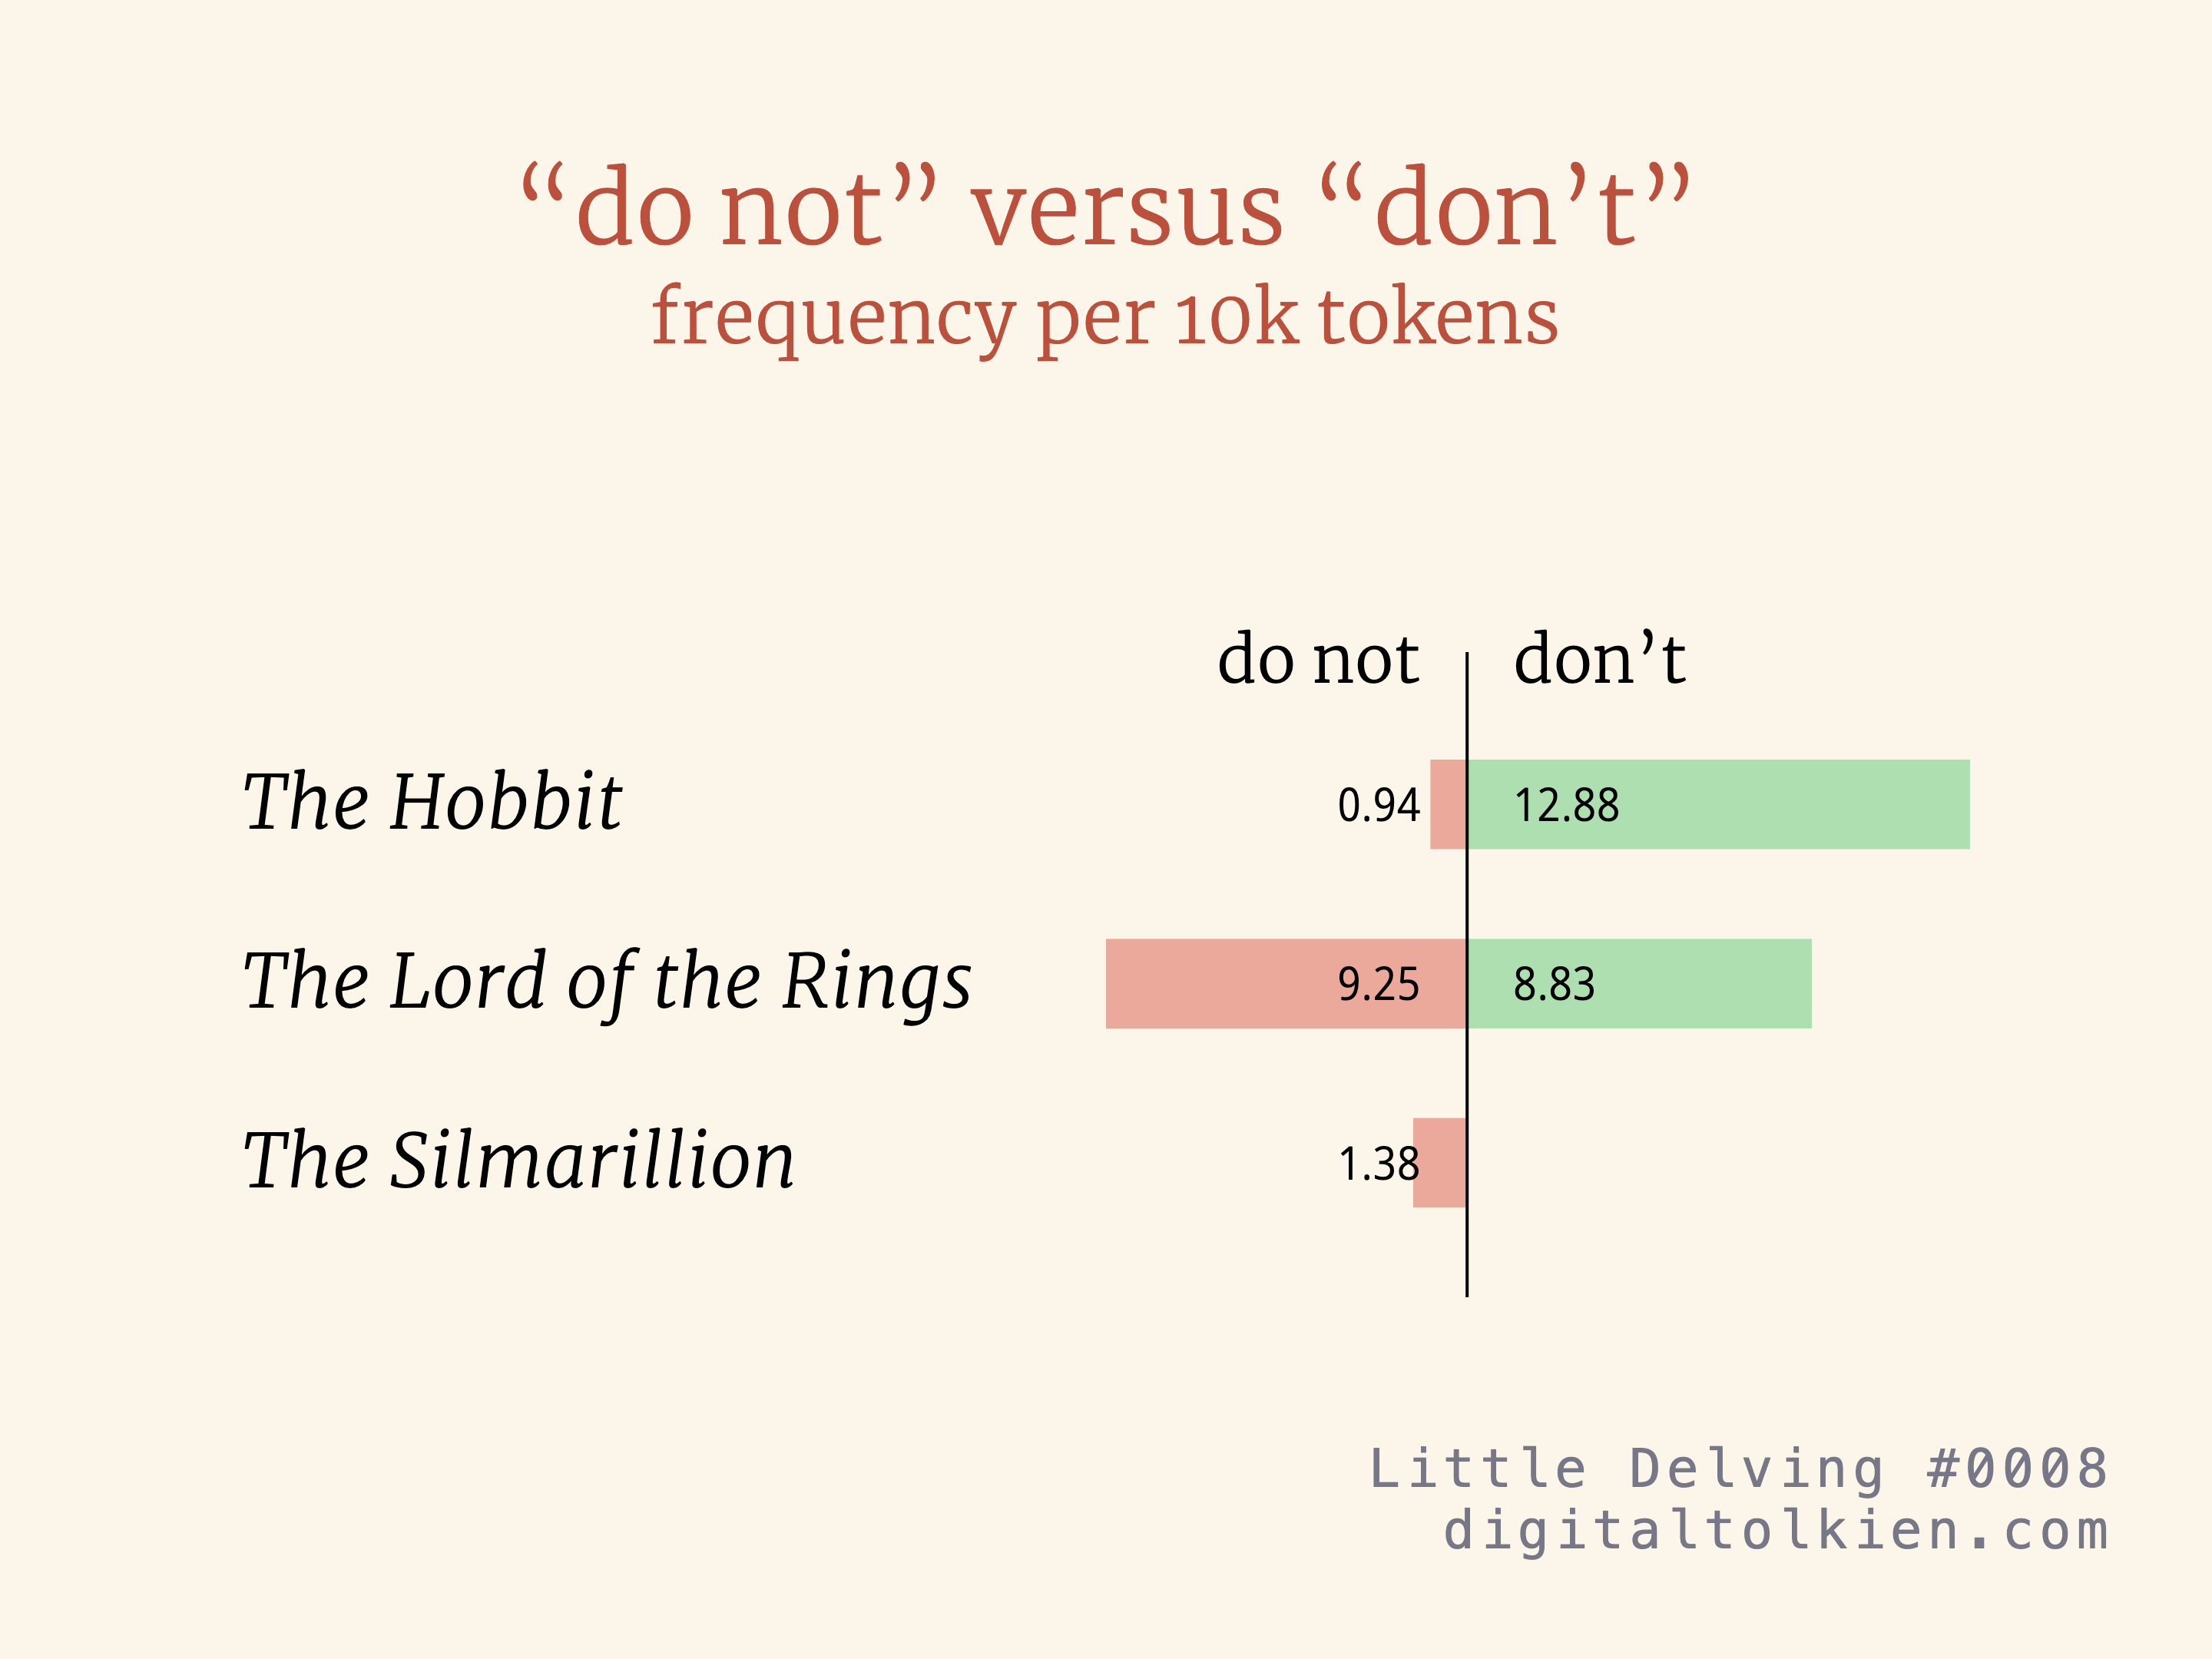 “do not” versus “don’t” frequency per 10k tokens
        The Hobbit: do not 0.94, don’t 12.88
        The Lord of the Rings: do not 9.25, don’t 8.83
        The Silmarillion: do not 1.38, don’t 0
        Little Delving #0008
        digitaltolkien.com
        